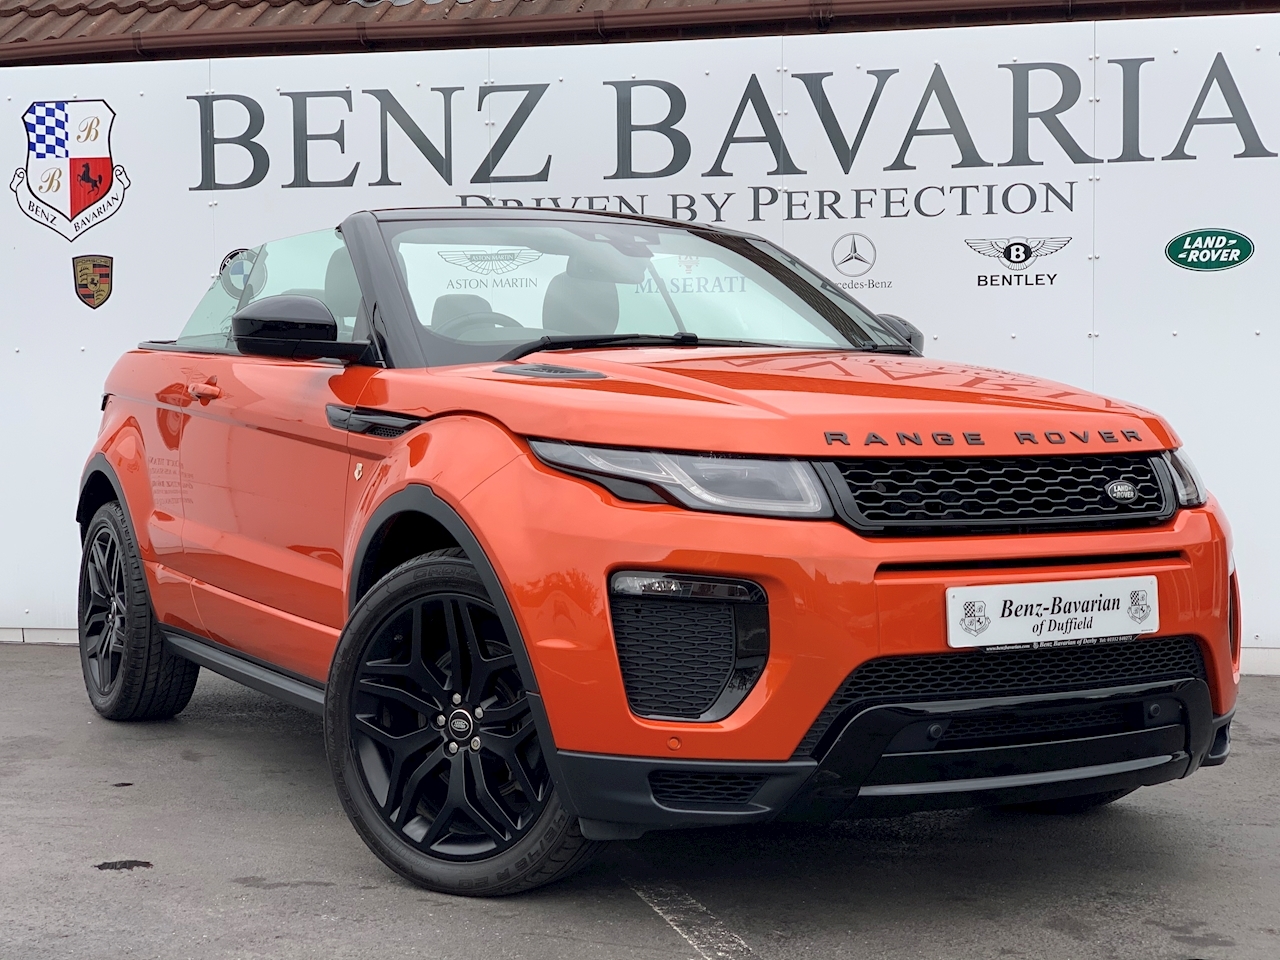 Range Rover Evoque Td4 Hse Dynamic Convertible 2.0 Automatic Diesel